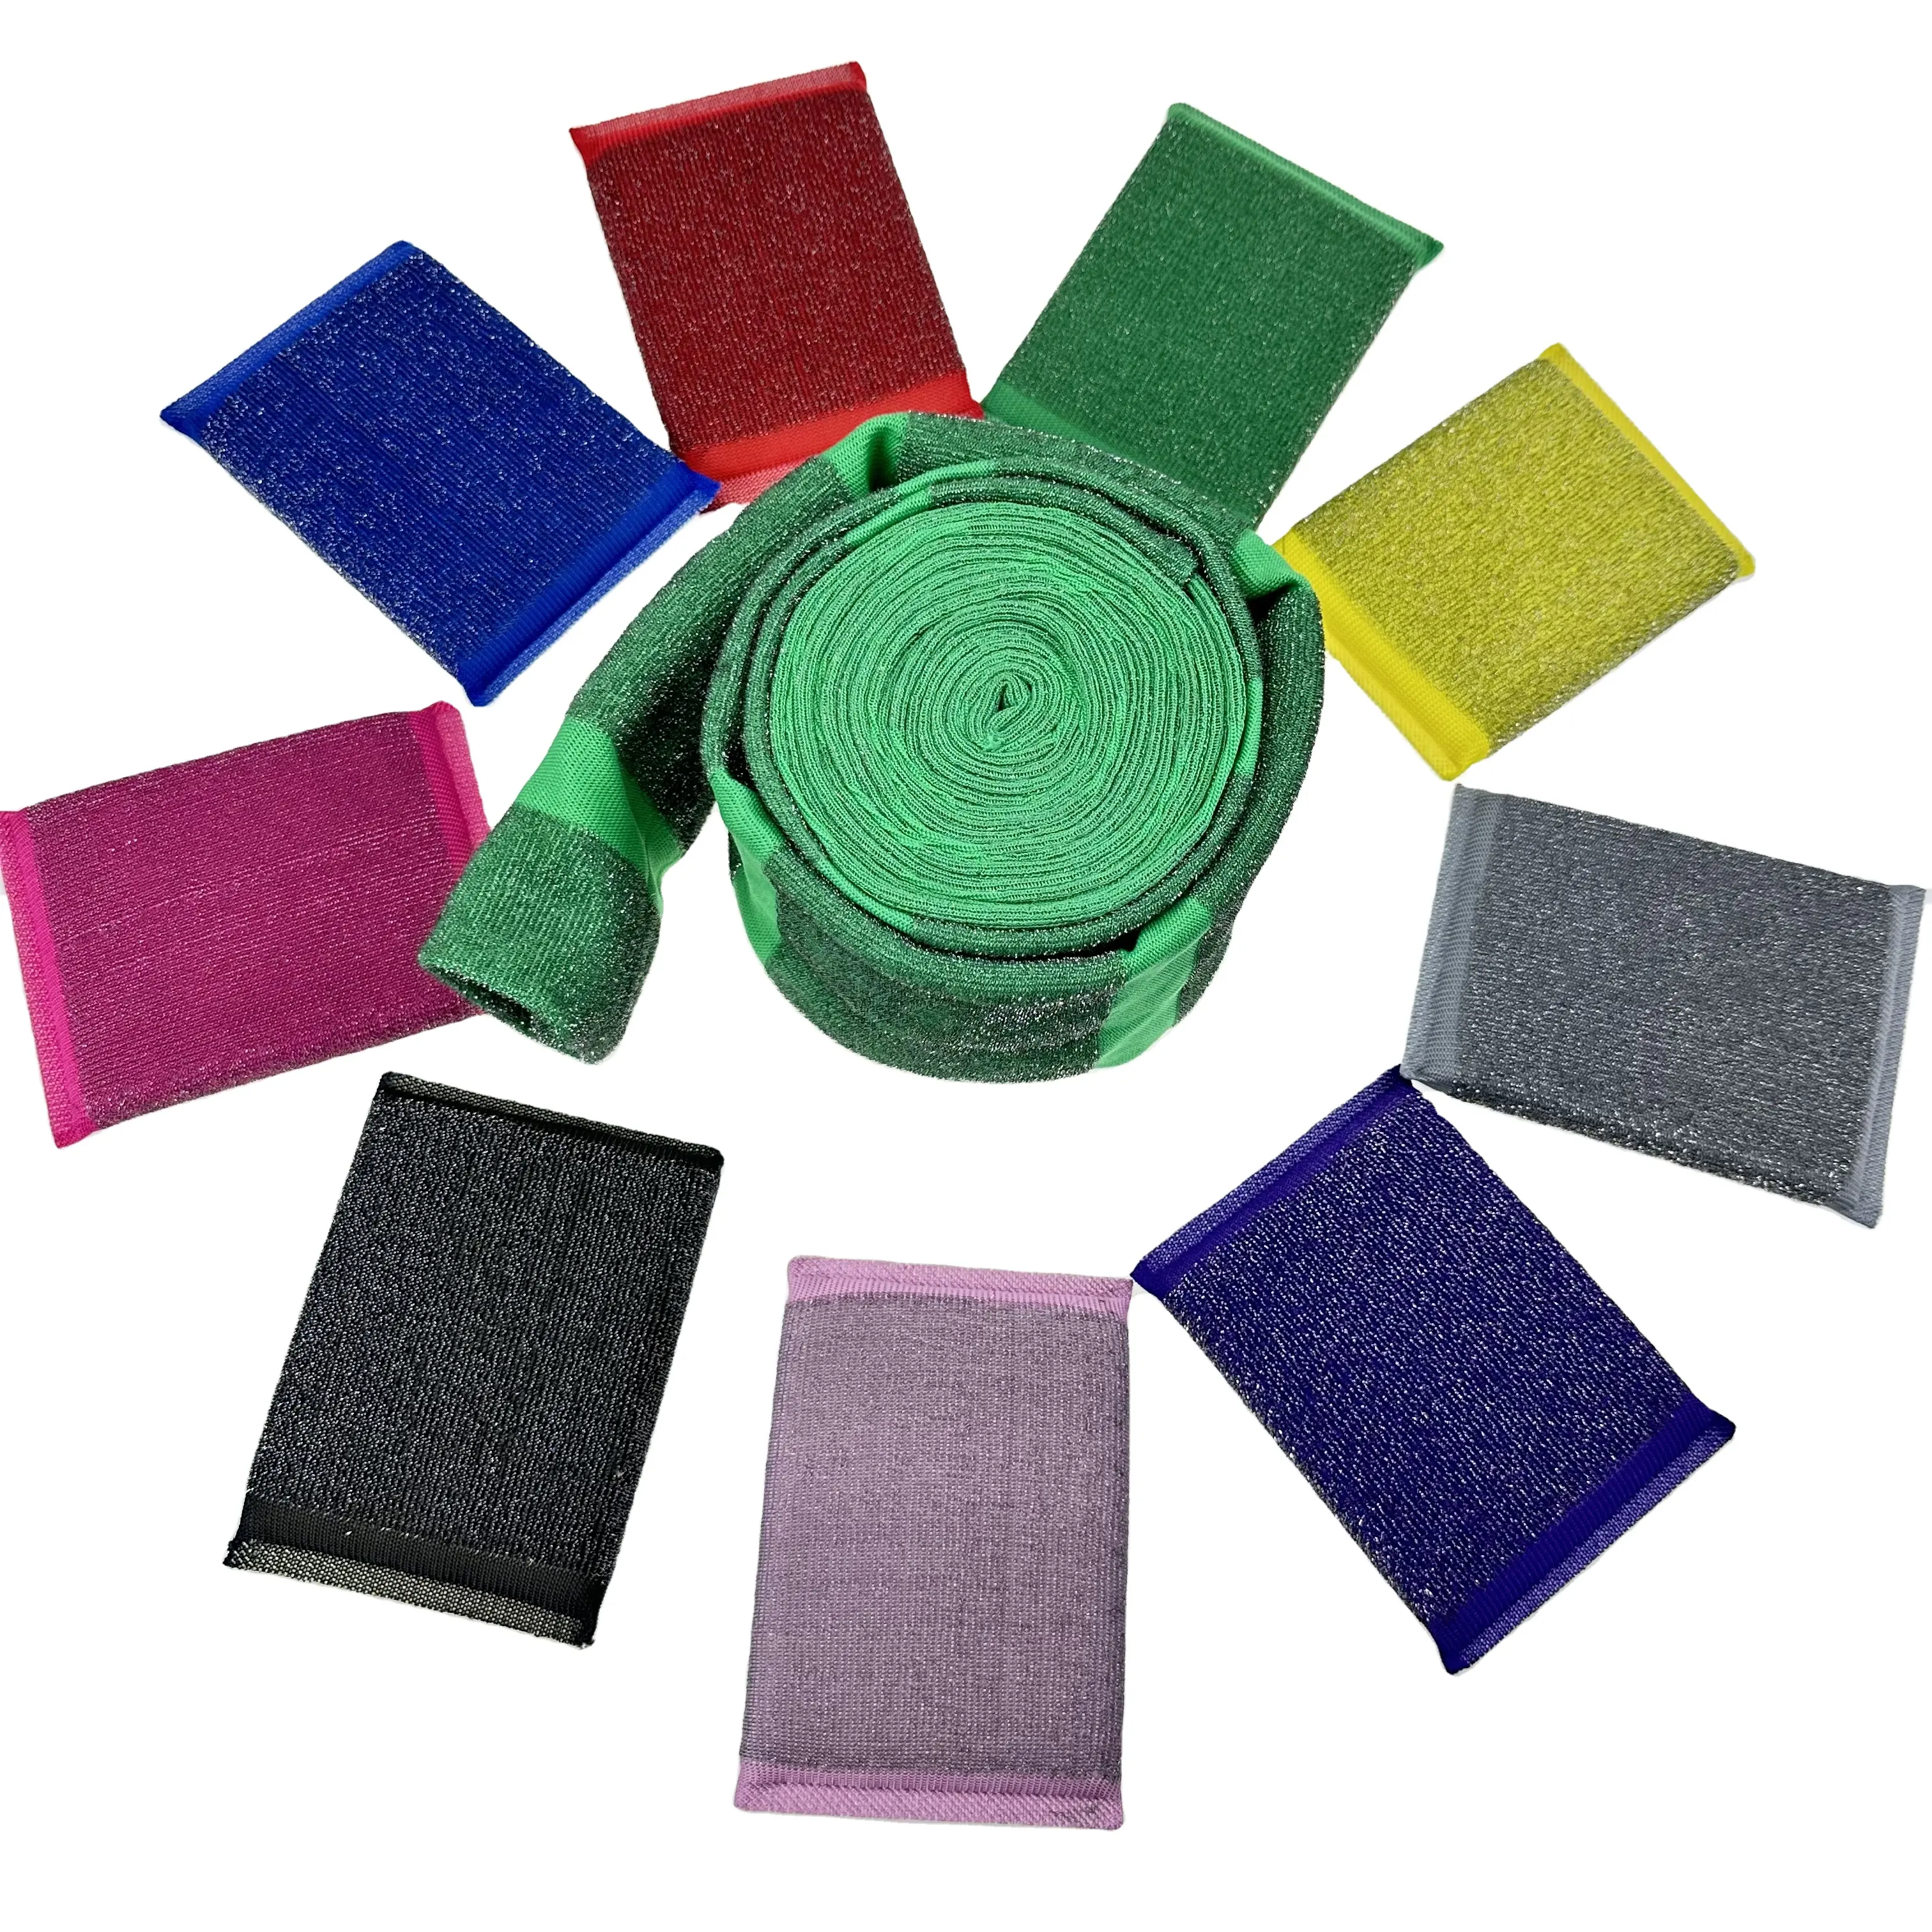 Best-selling stainless steel sponge mopping cloth sponge cleaning wire scouring pad